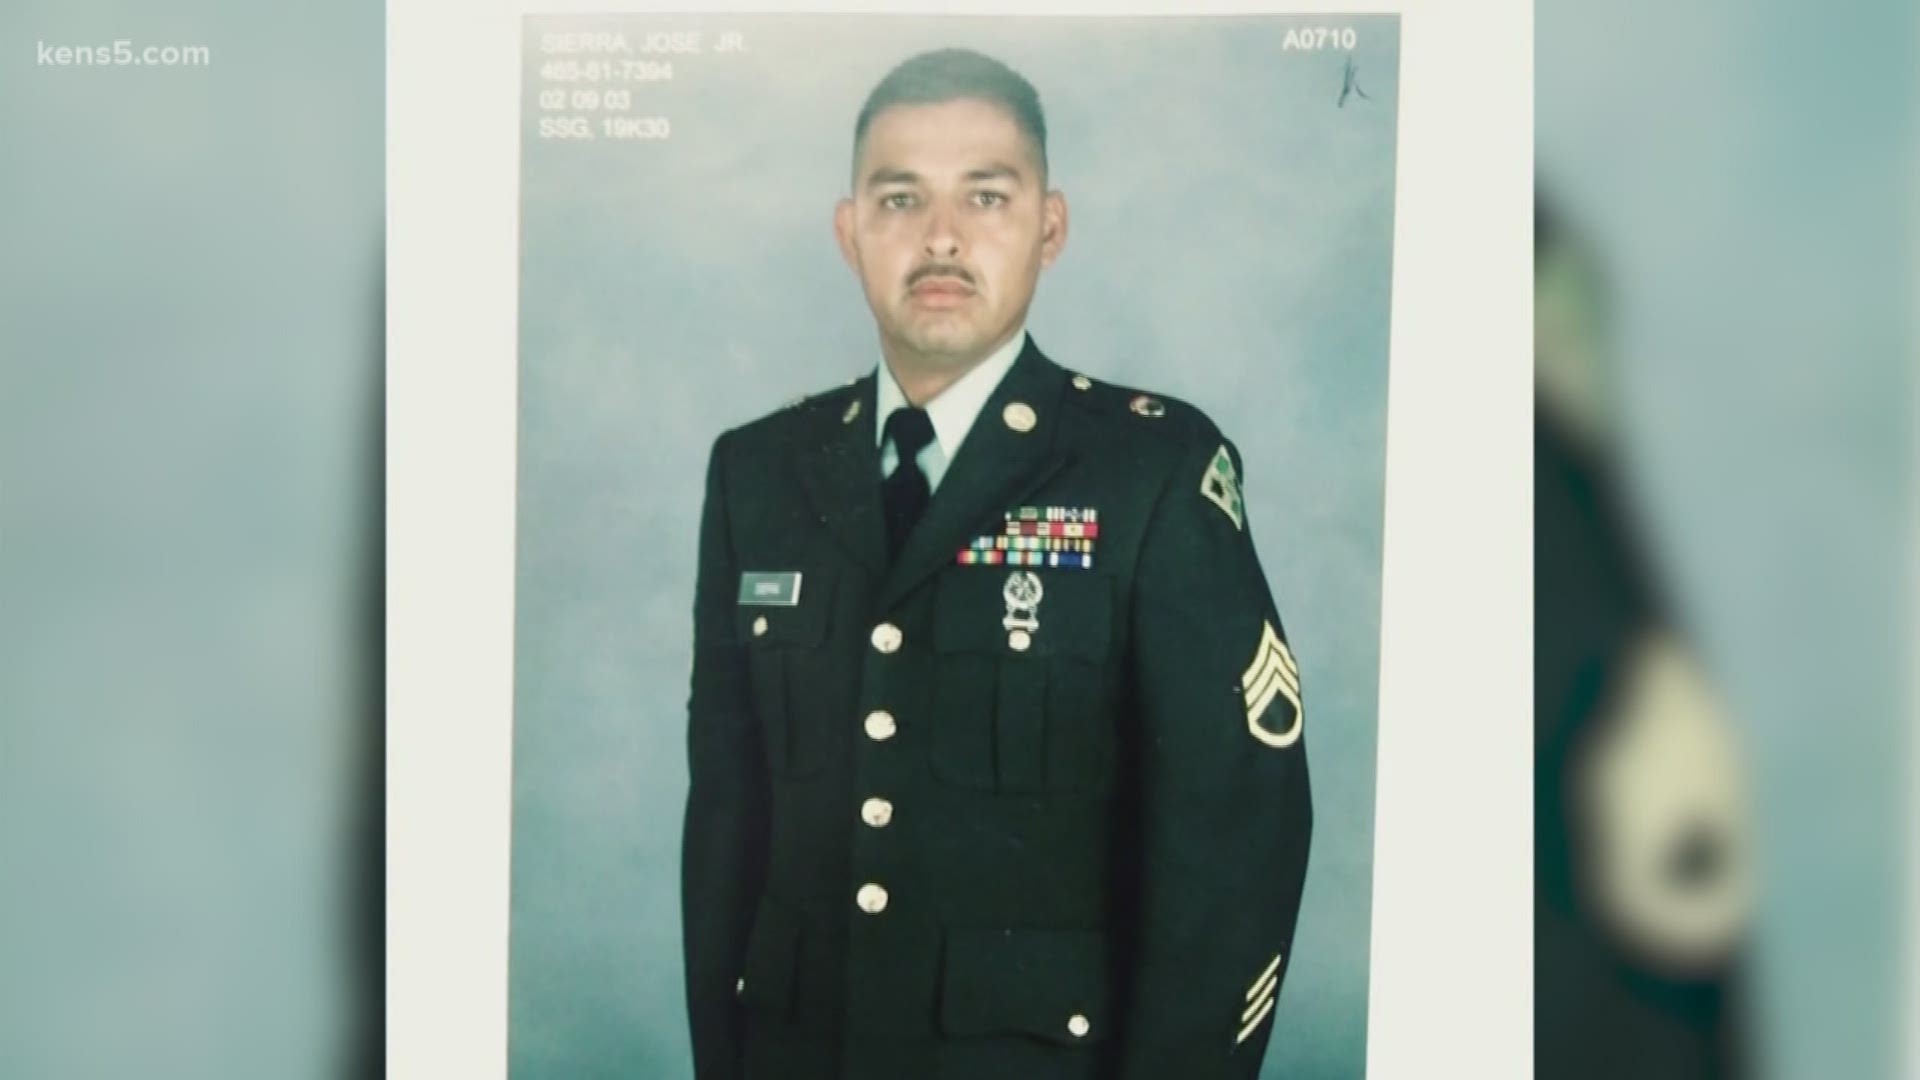 One San Antonio Army veteran received a grand gesture of gratitude for his service. Eyewitness News reporter Savannah Louie shows us how his community is saying "thank you."